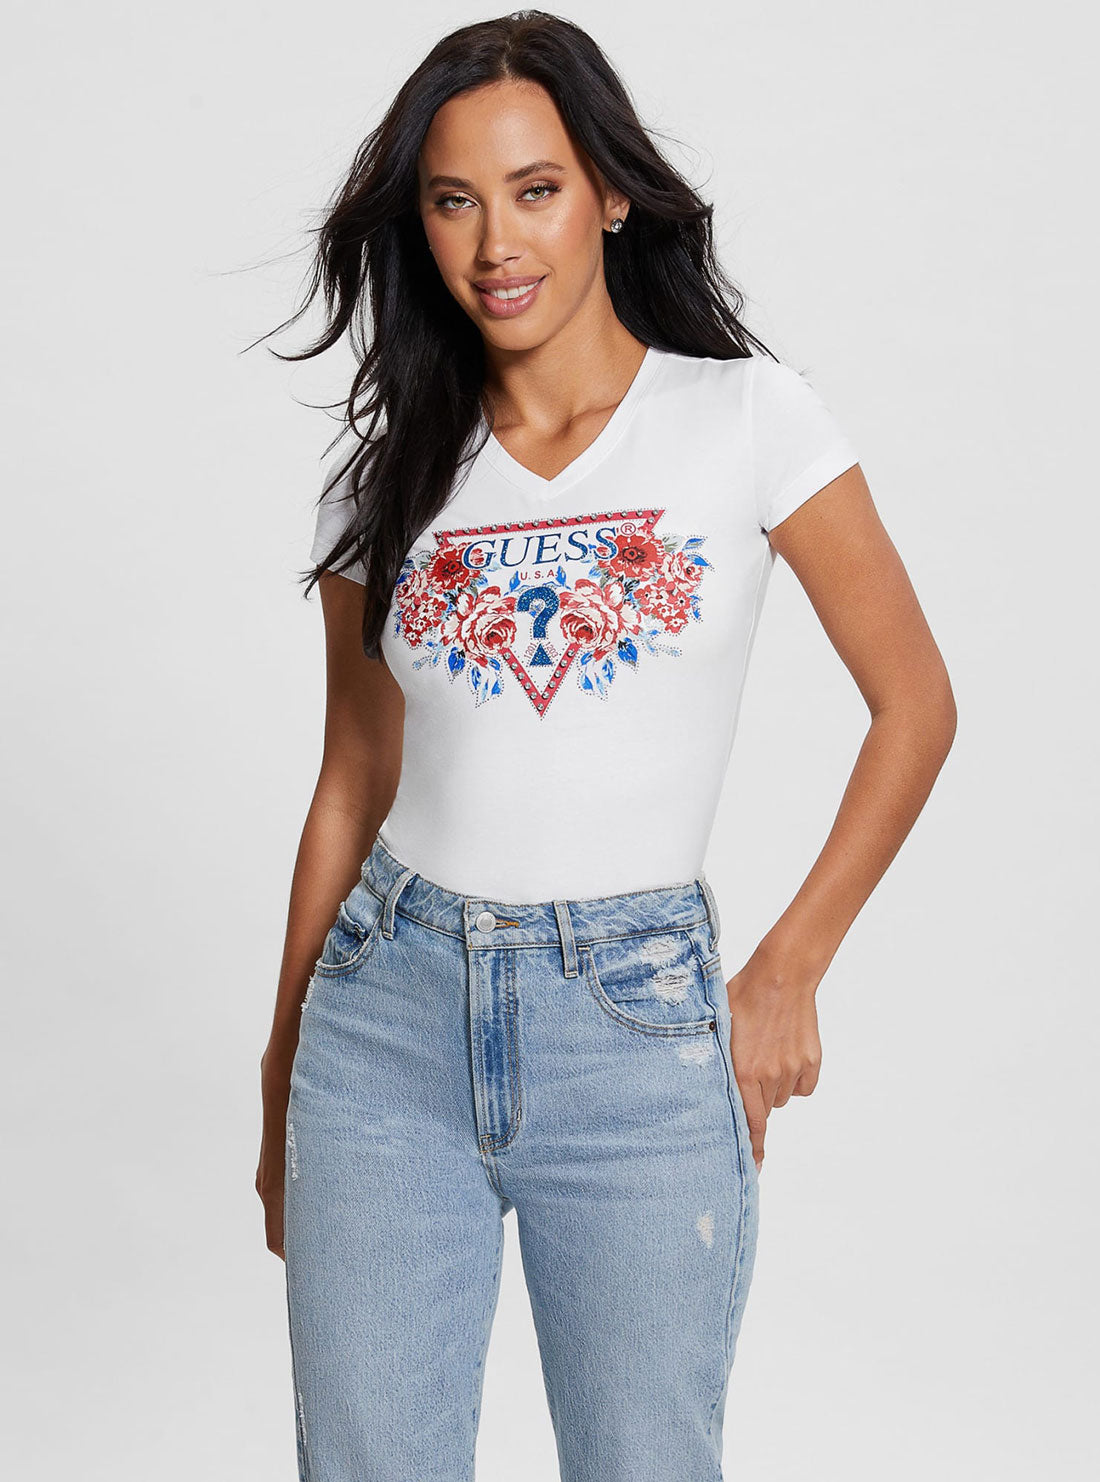 White Rose Triangle Logo T-Shirt | GUESS Women's Apparel | front view